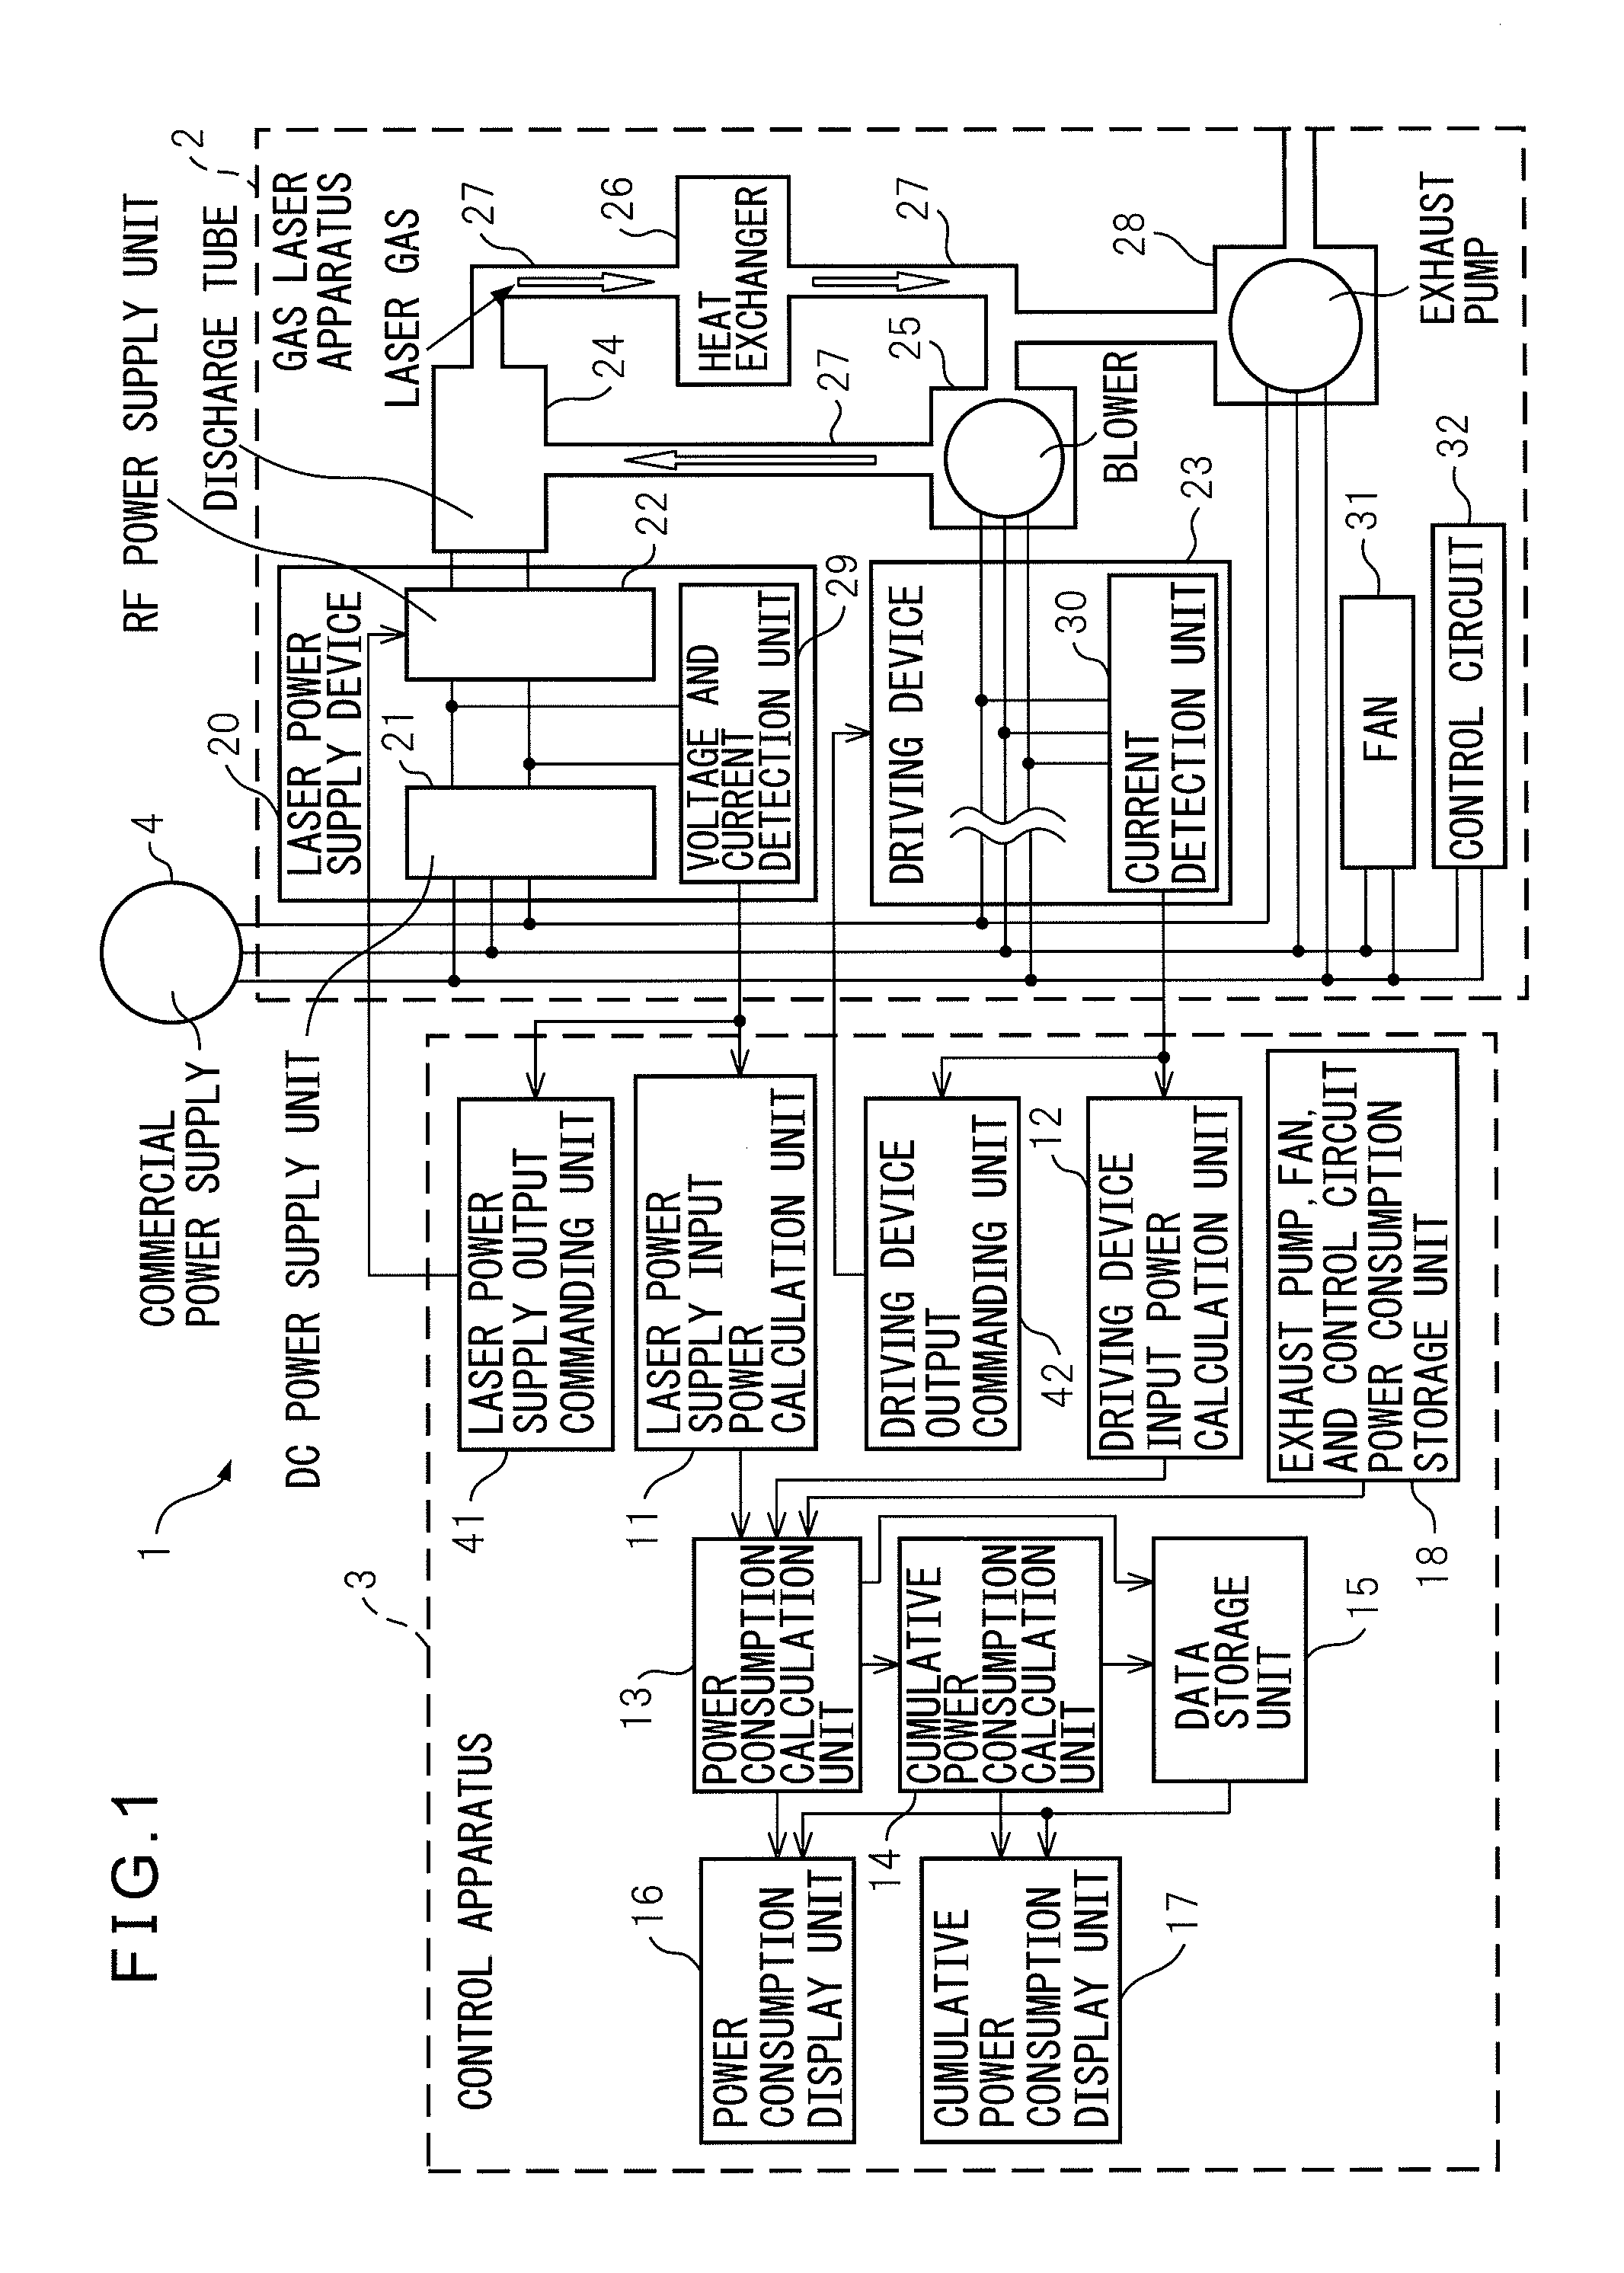 Gas laser apparatus equipped with power calculation unit